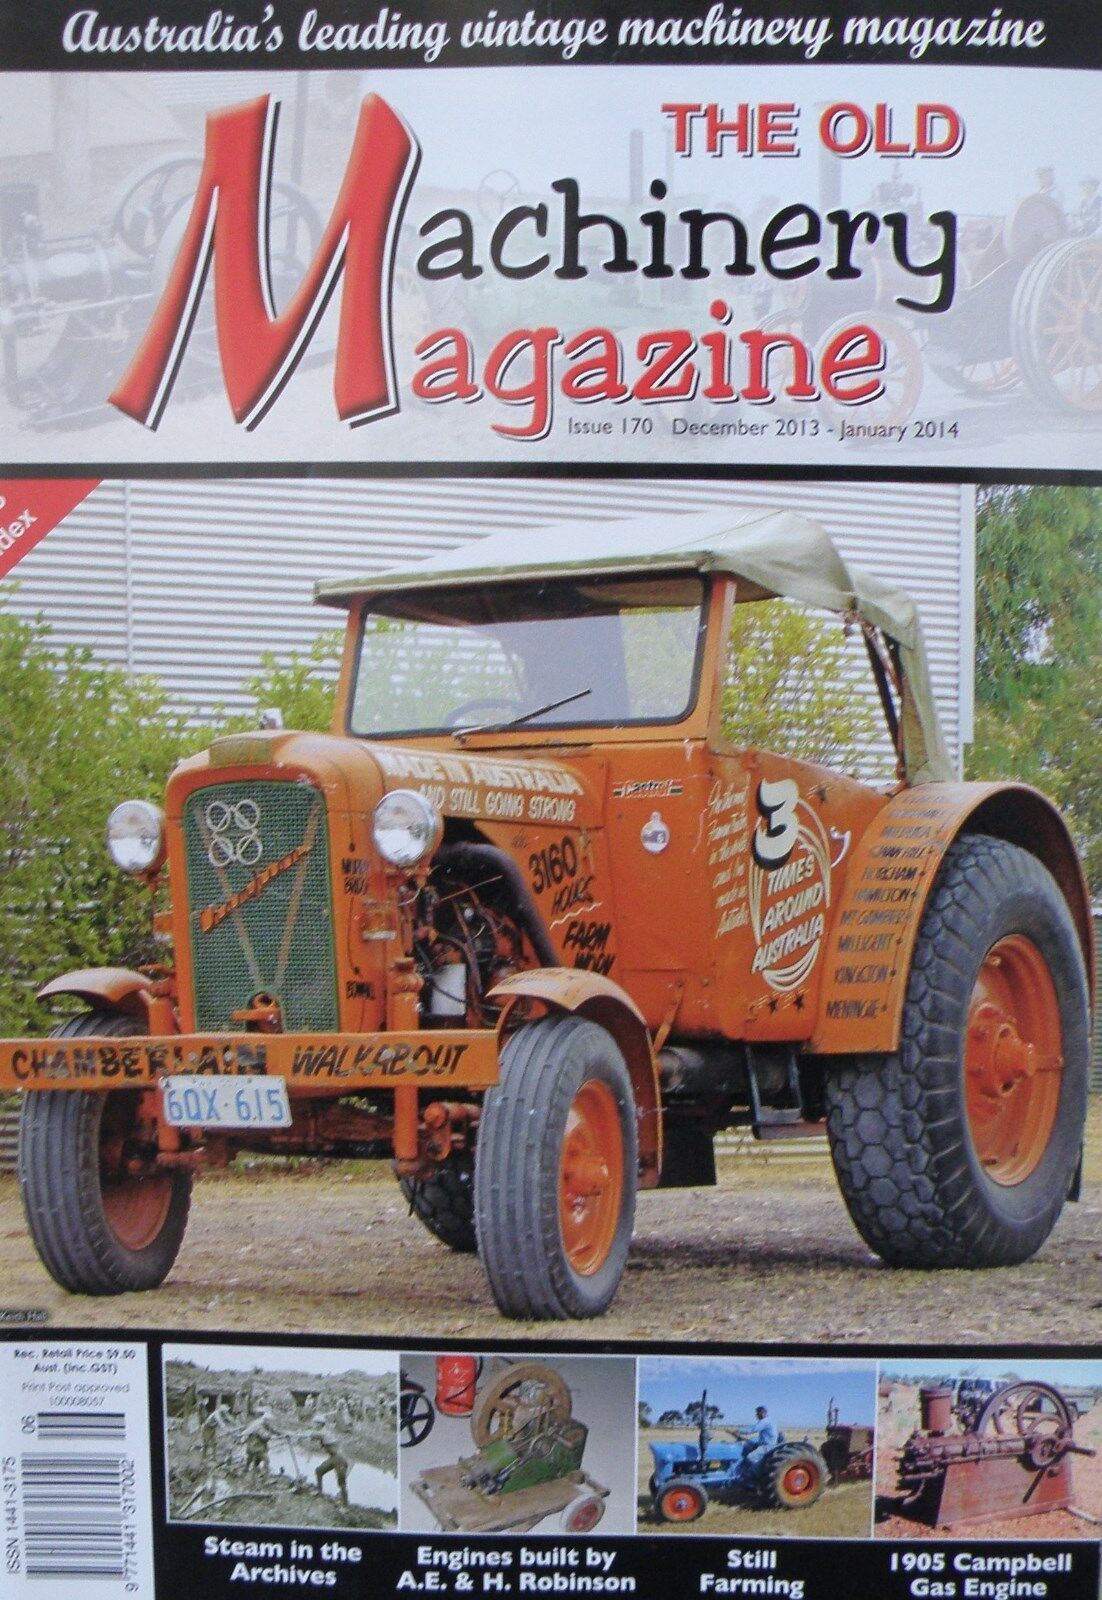 The Old Machinery Magazine Issue 170 December 2013 - January 2014